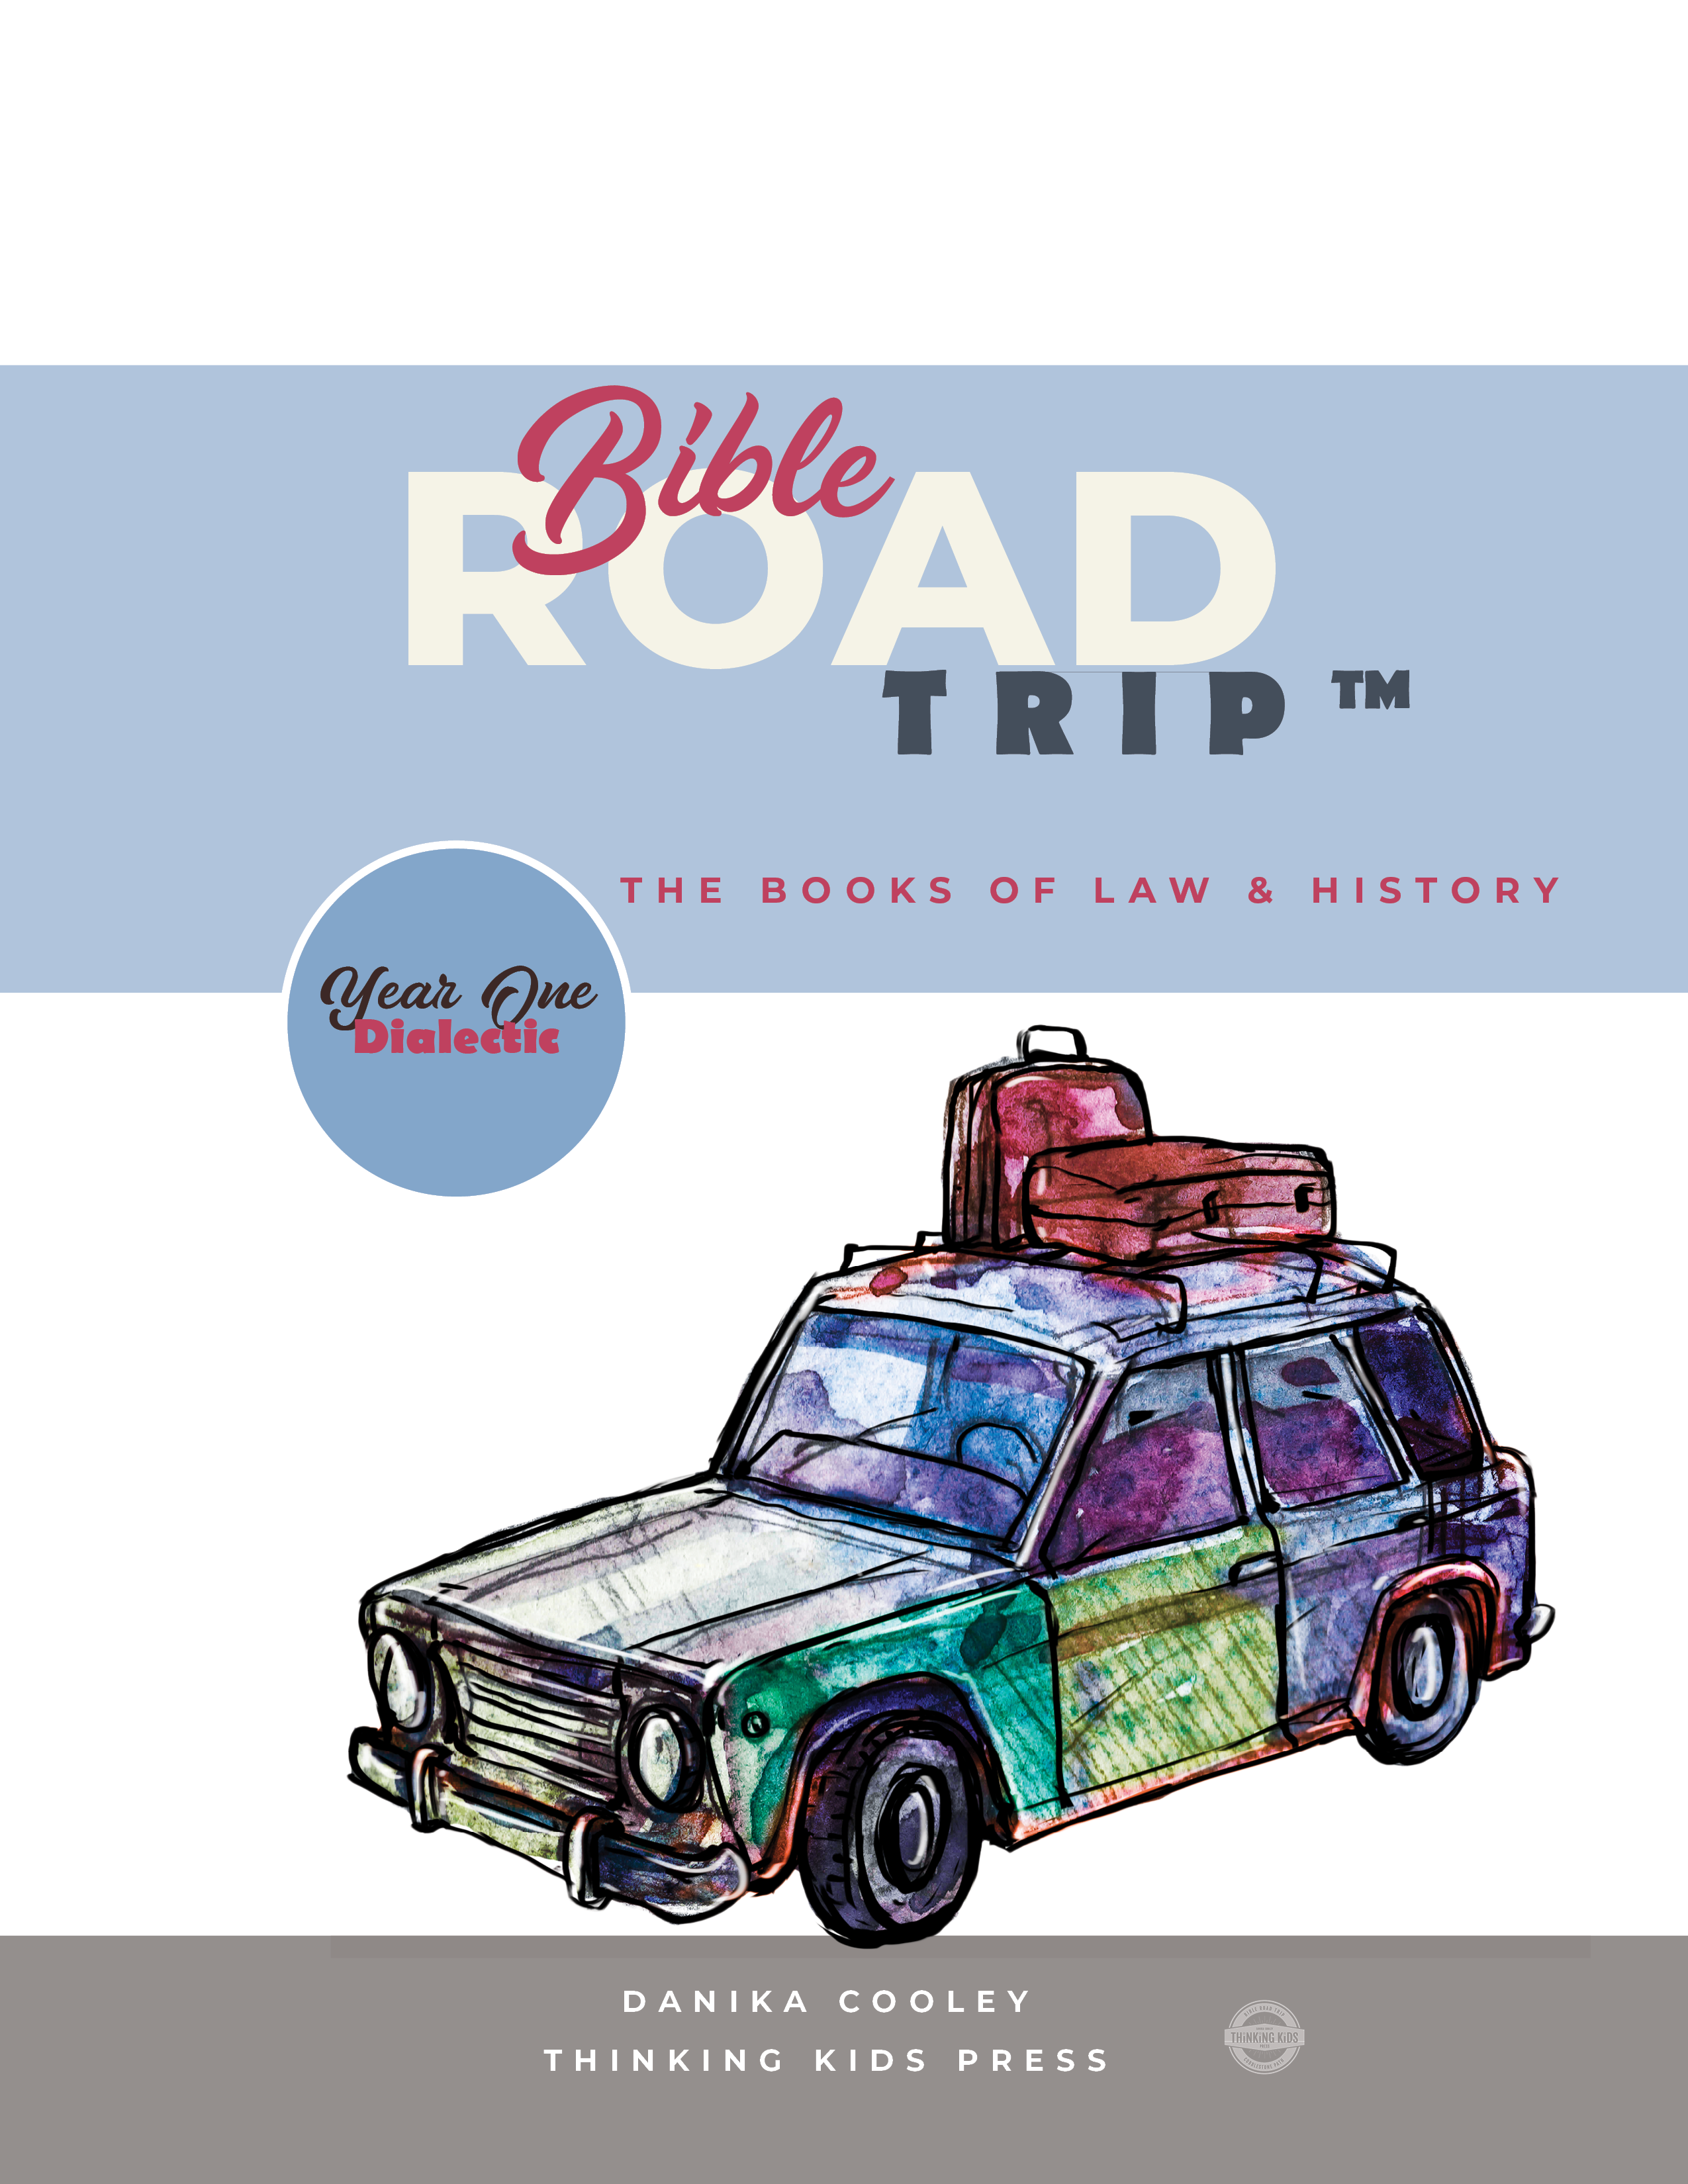 Bible Road Trip™ Year One Curriculum